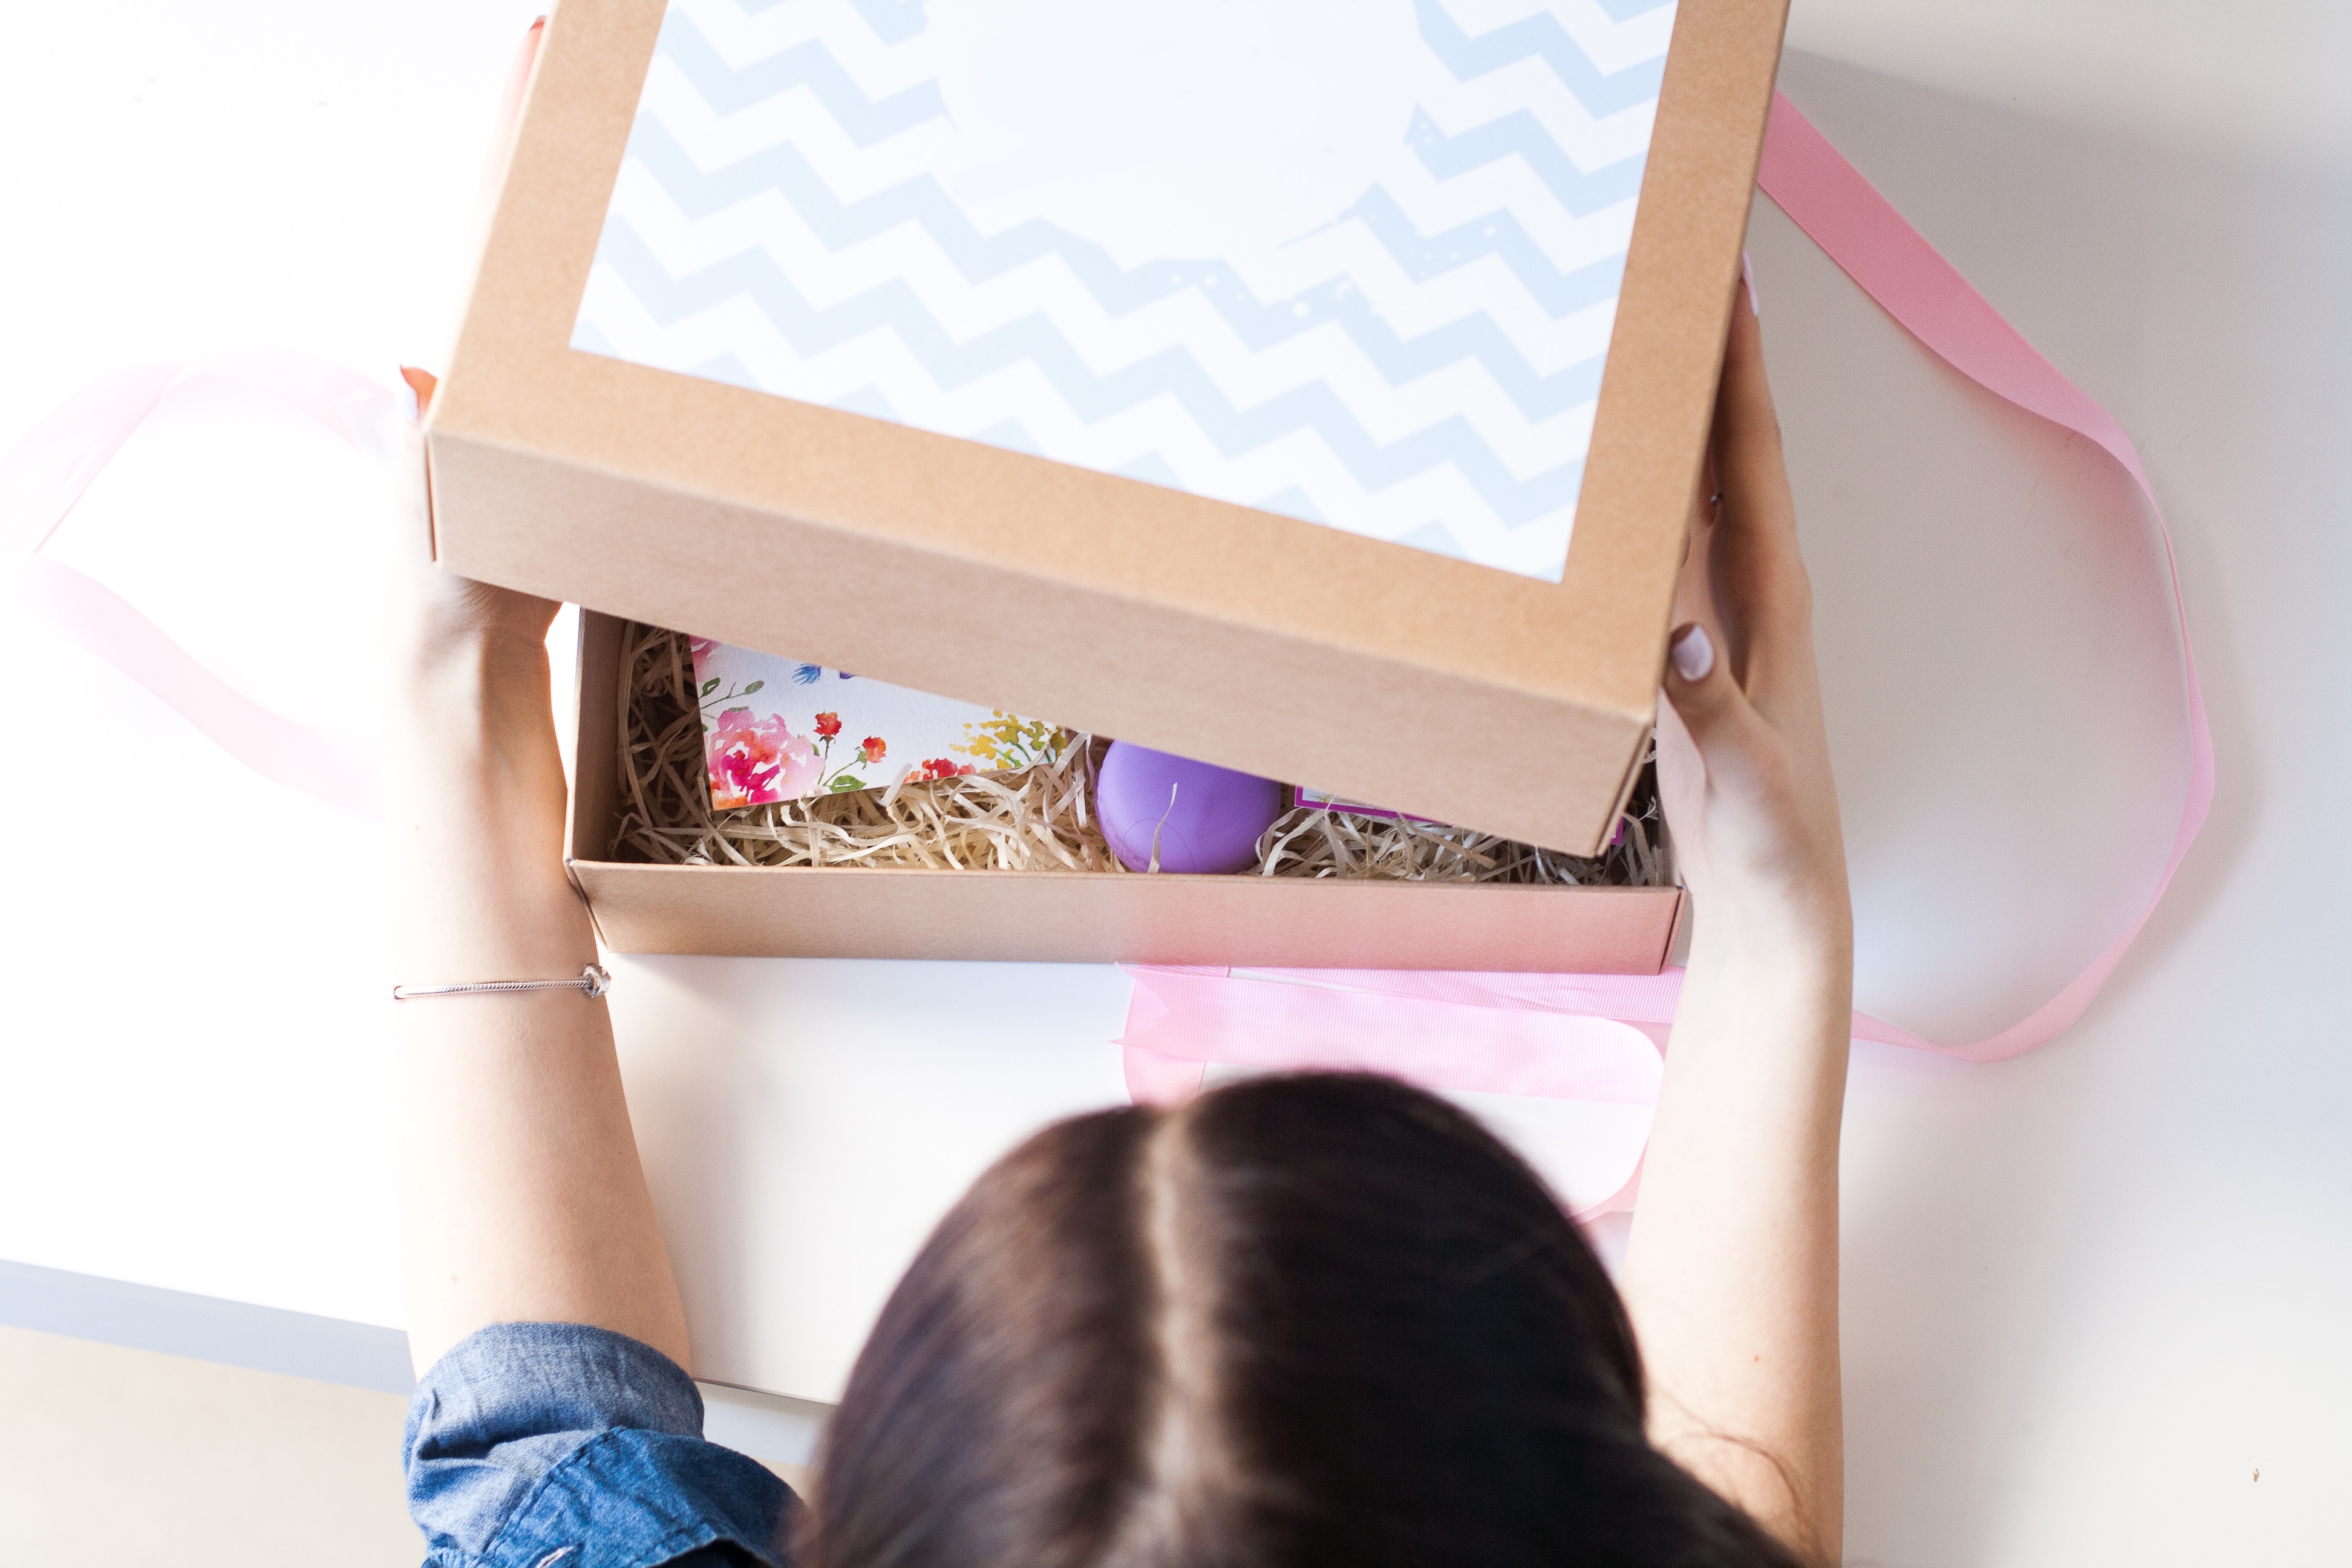 An overhead view of a dark-haired child opening a cardboard box with treasures inside. Starting a home craft business means understanding shipping materials.